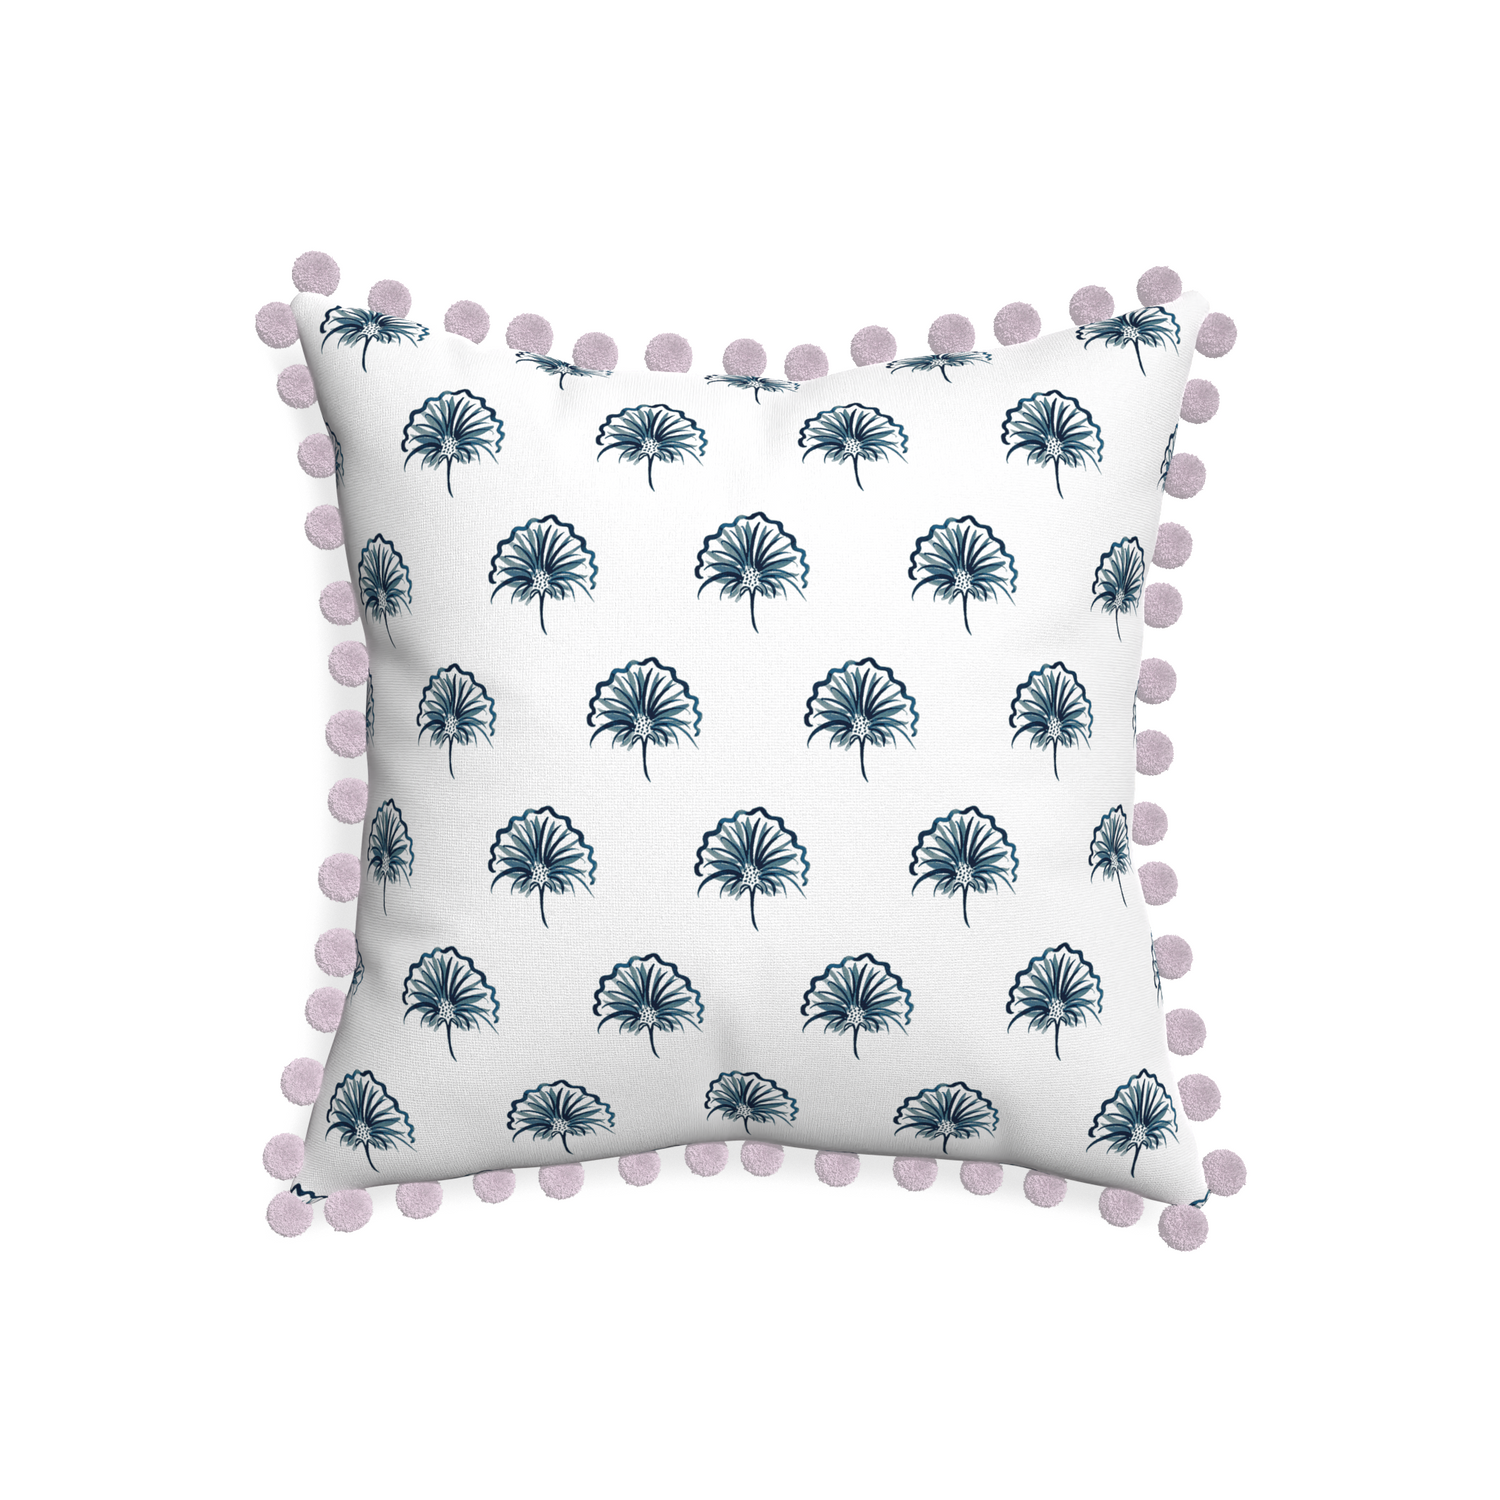 20-square penelope midnight custom floral navypillow with l on white background